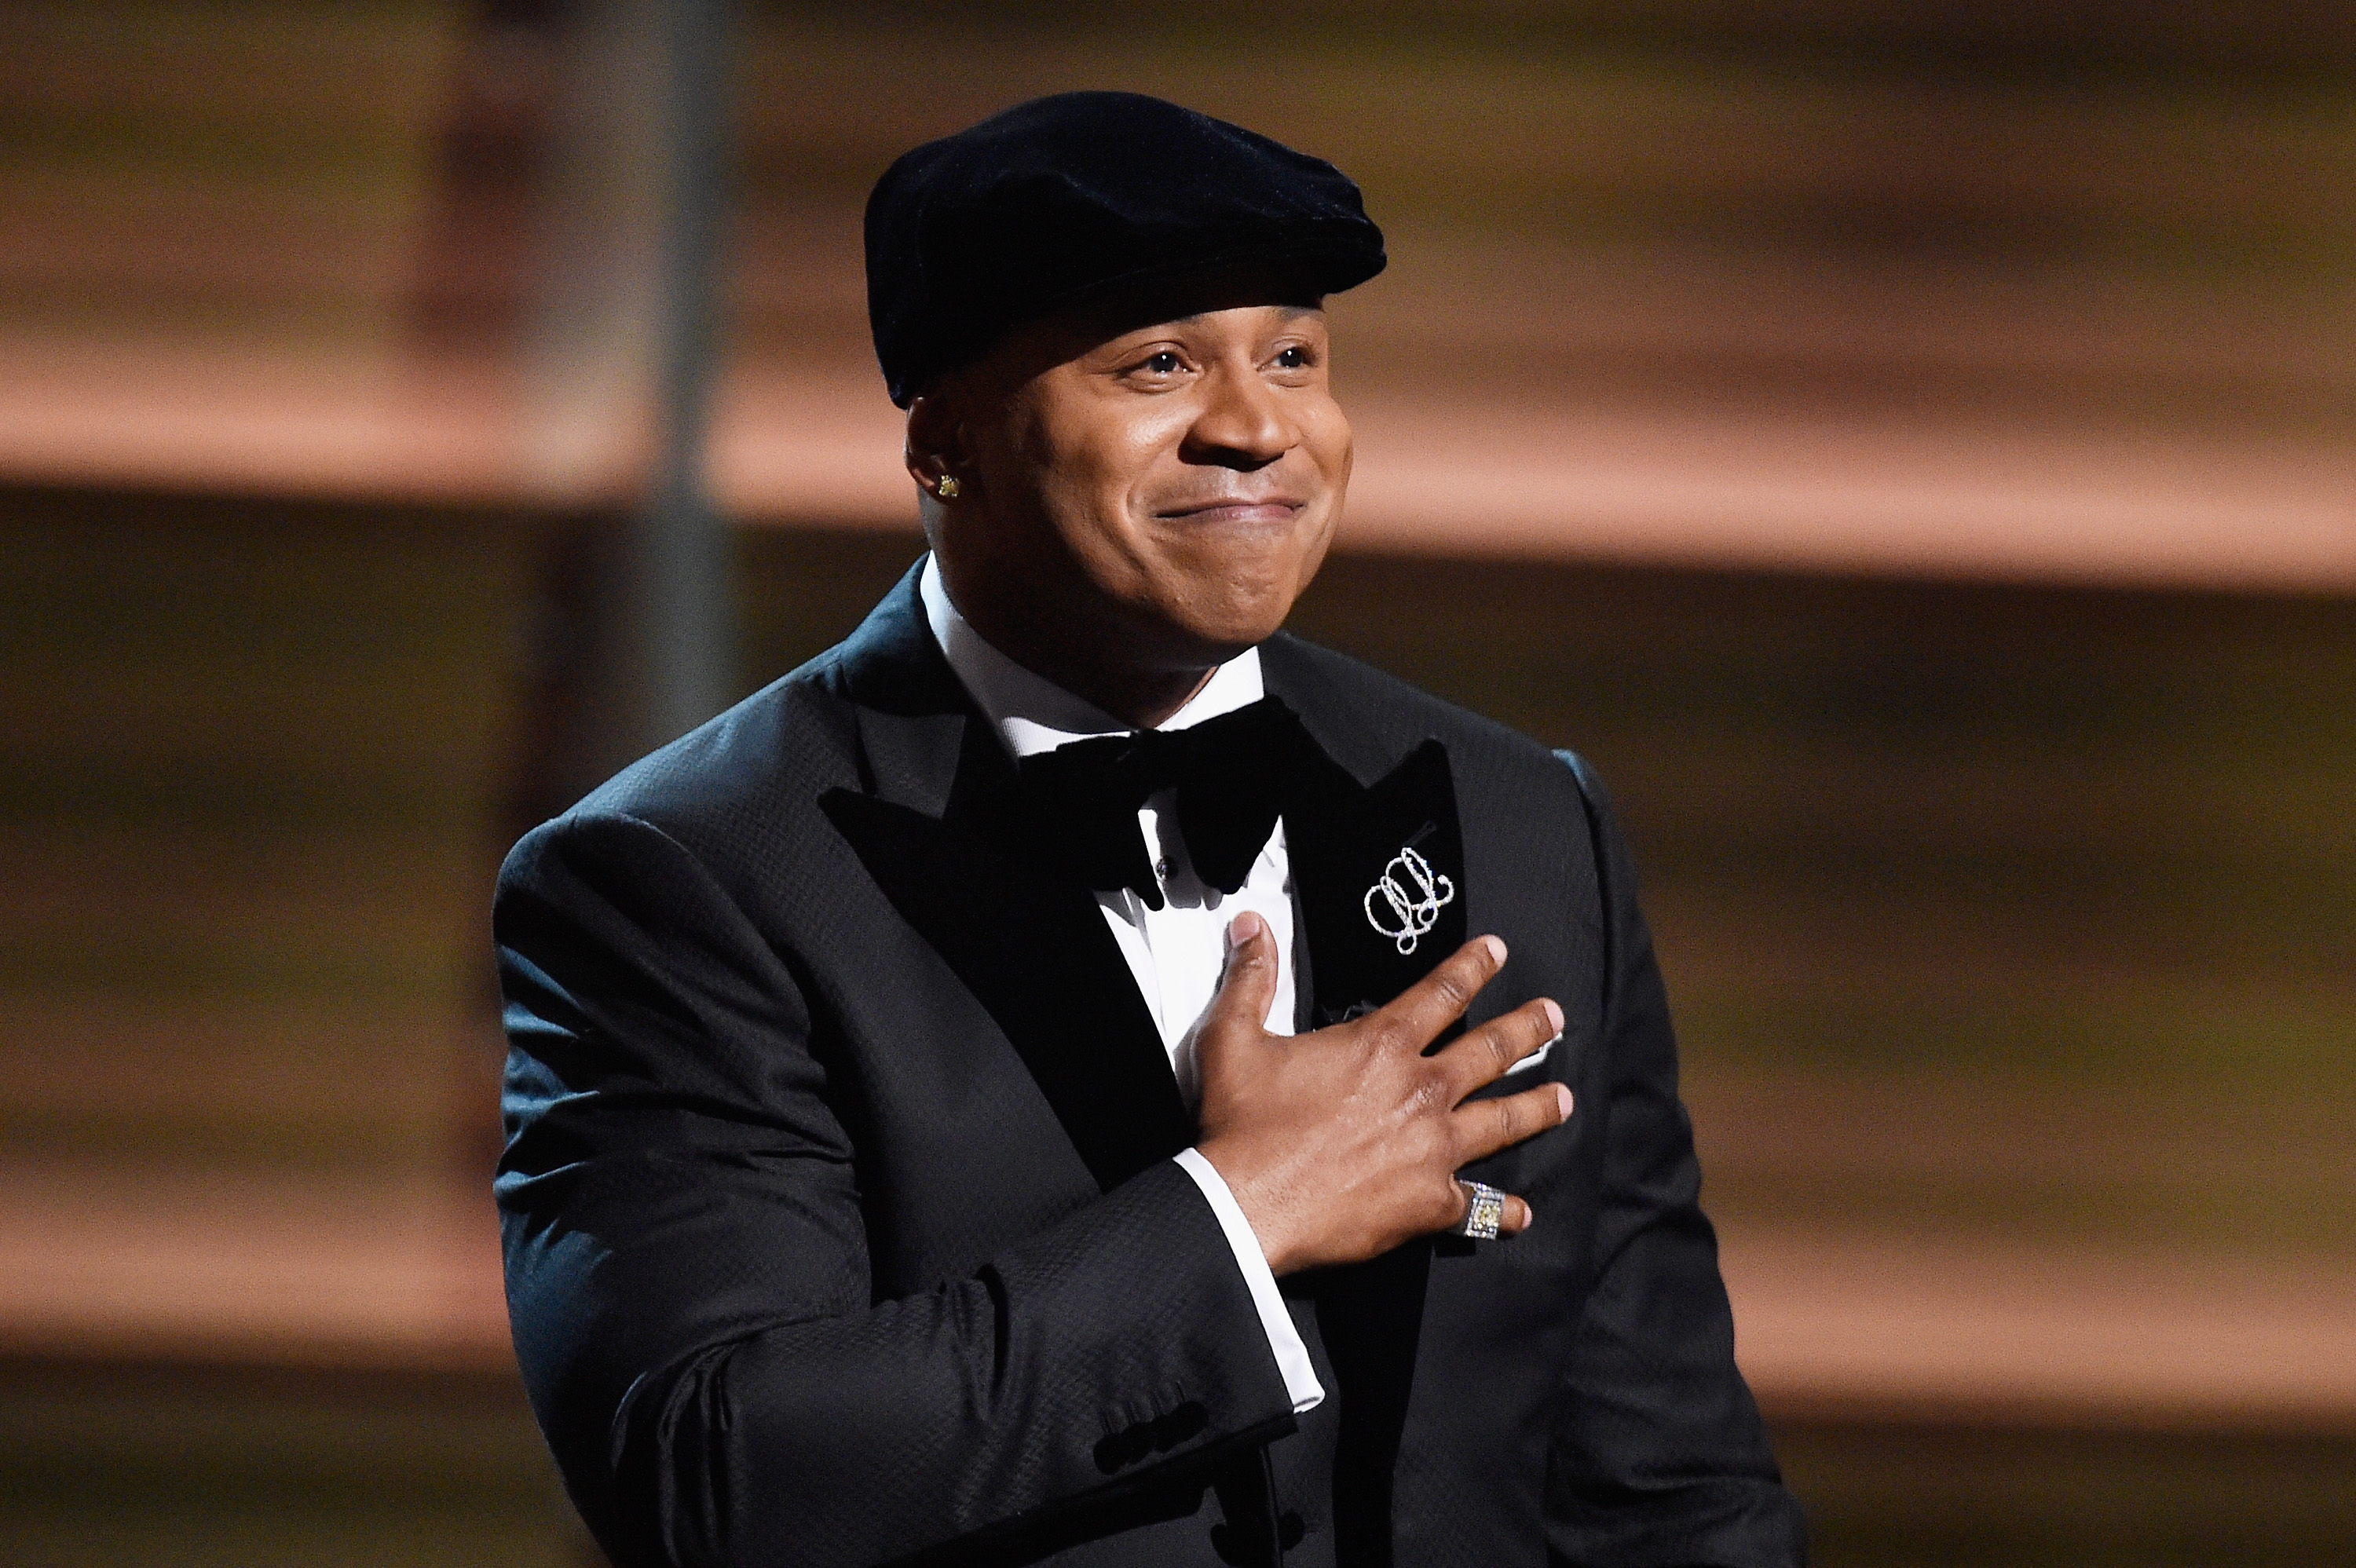 LL COOL J Partners With Phenix Salon Suites To Own & Operate Independent Salons